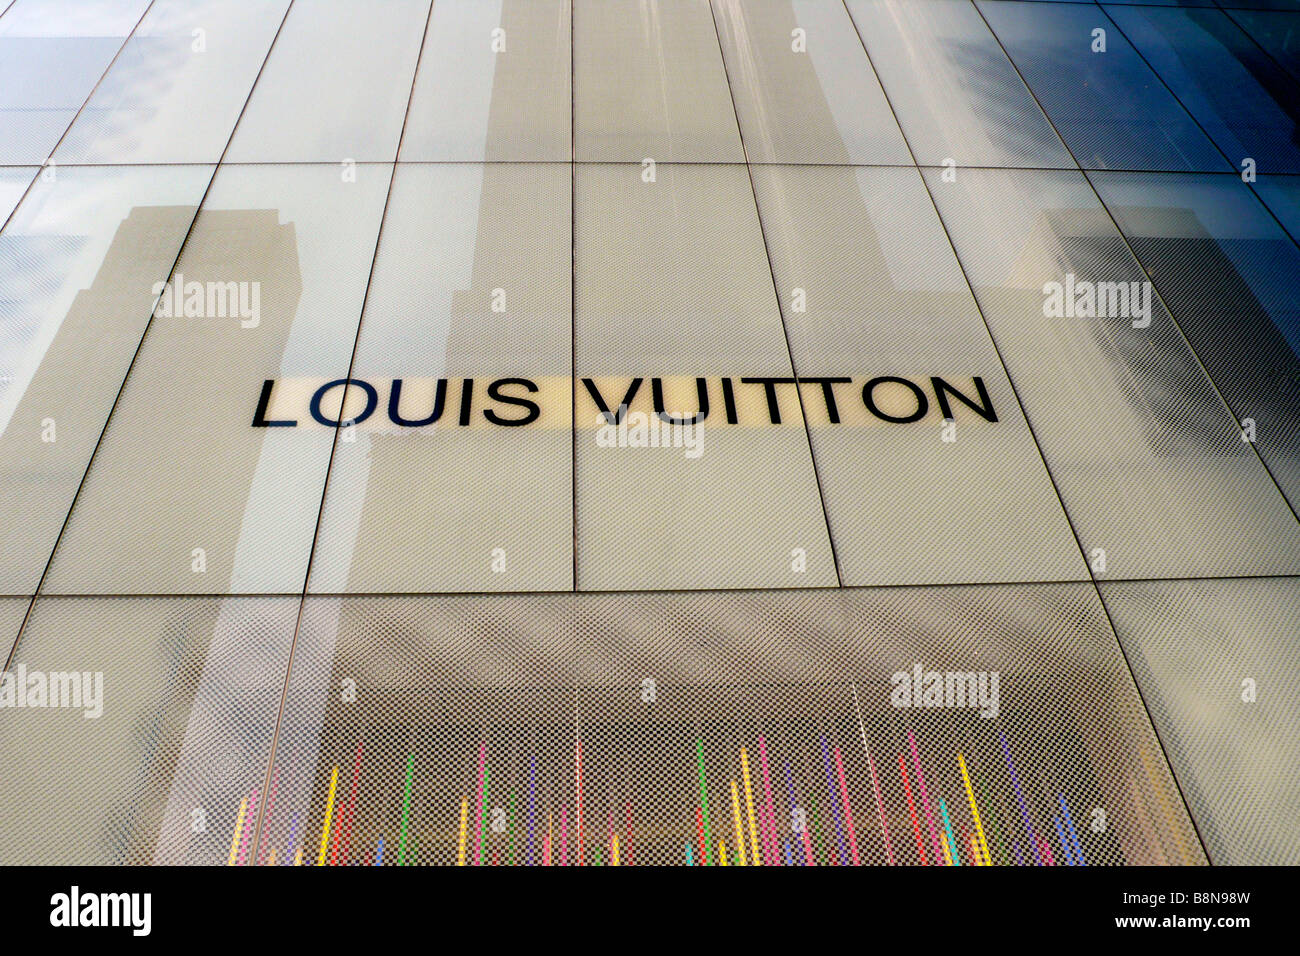 Louis Vuitton shop in Cologne, Germany Stock Photo - Alamy